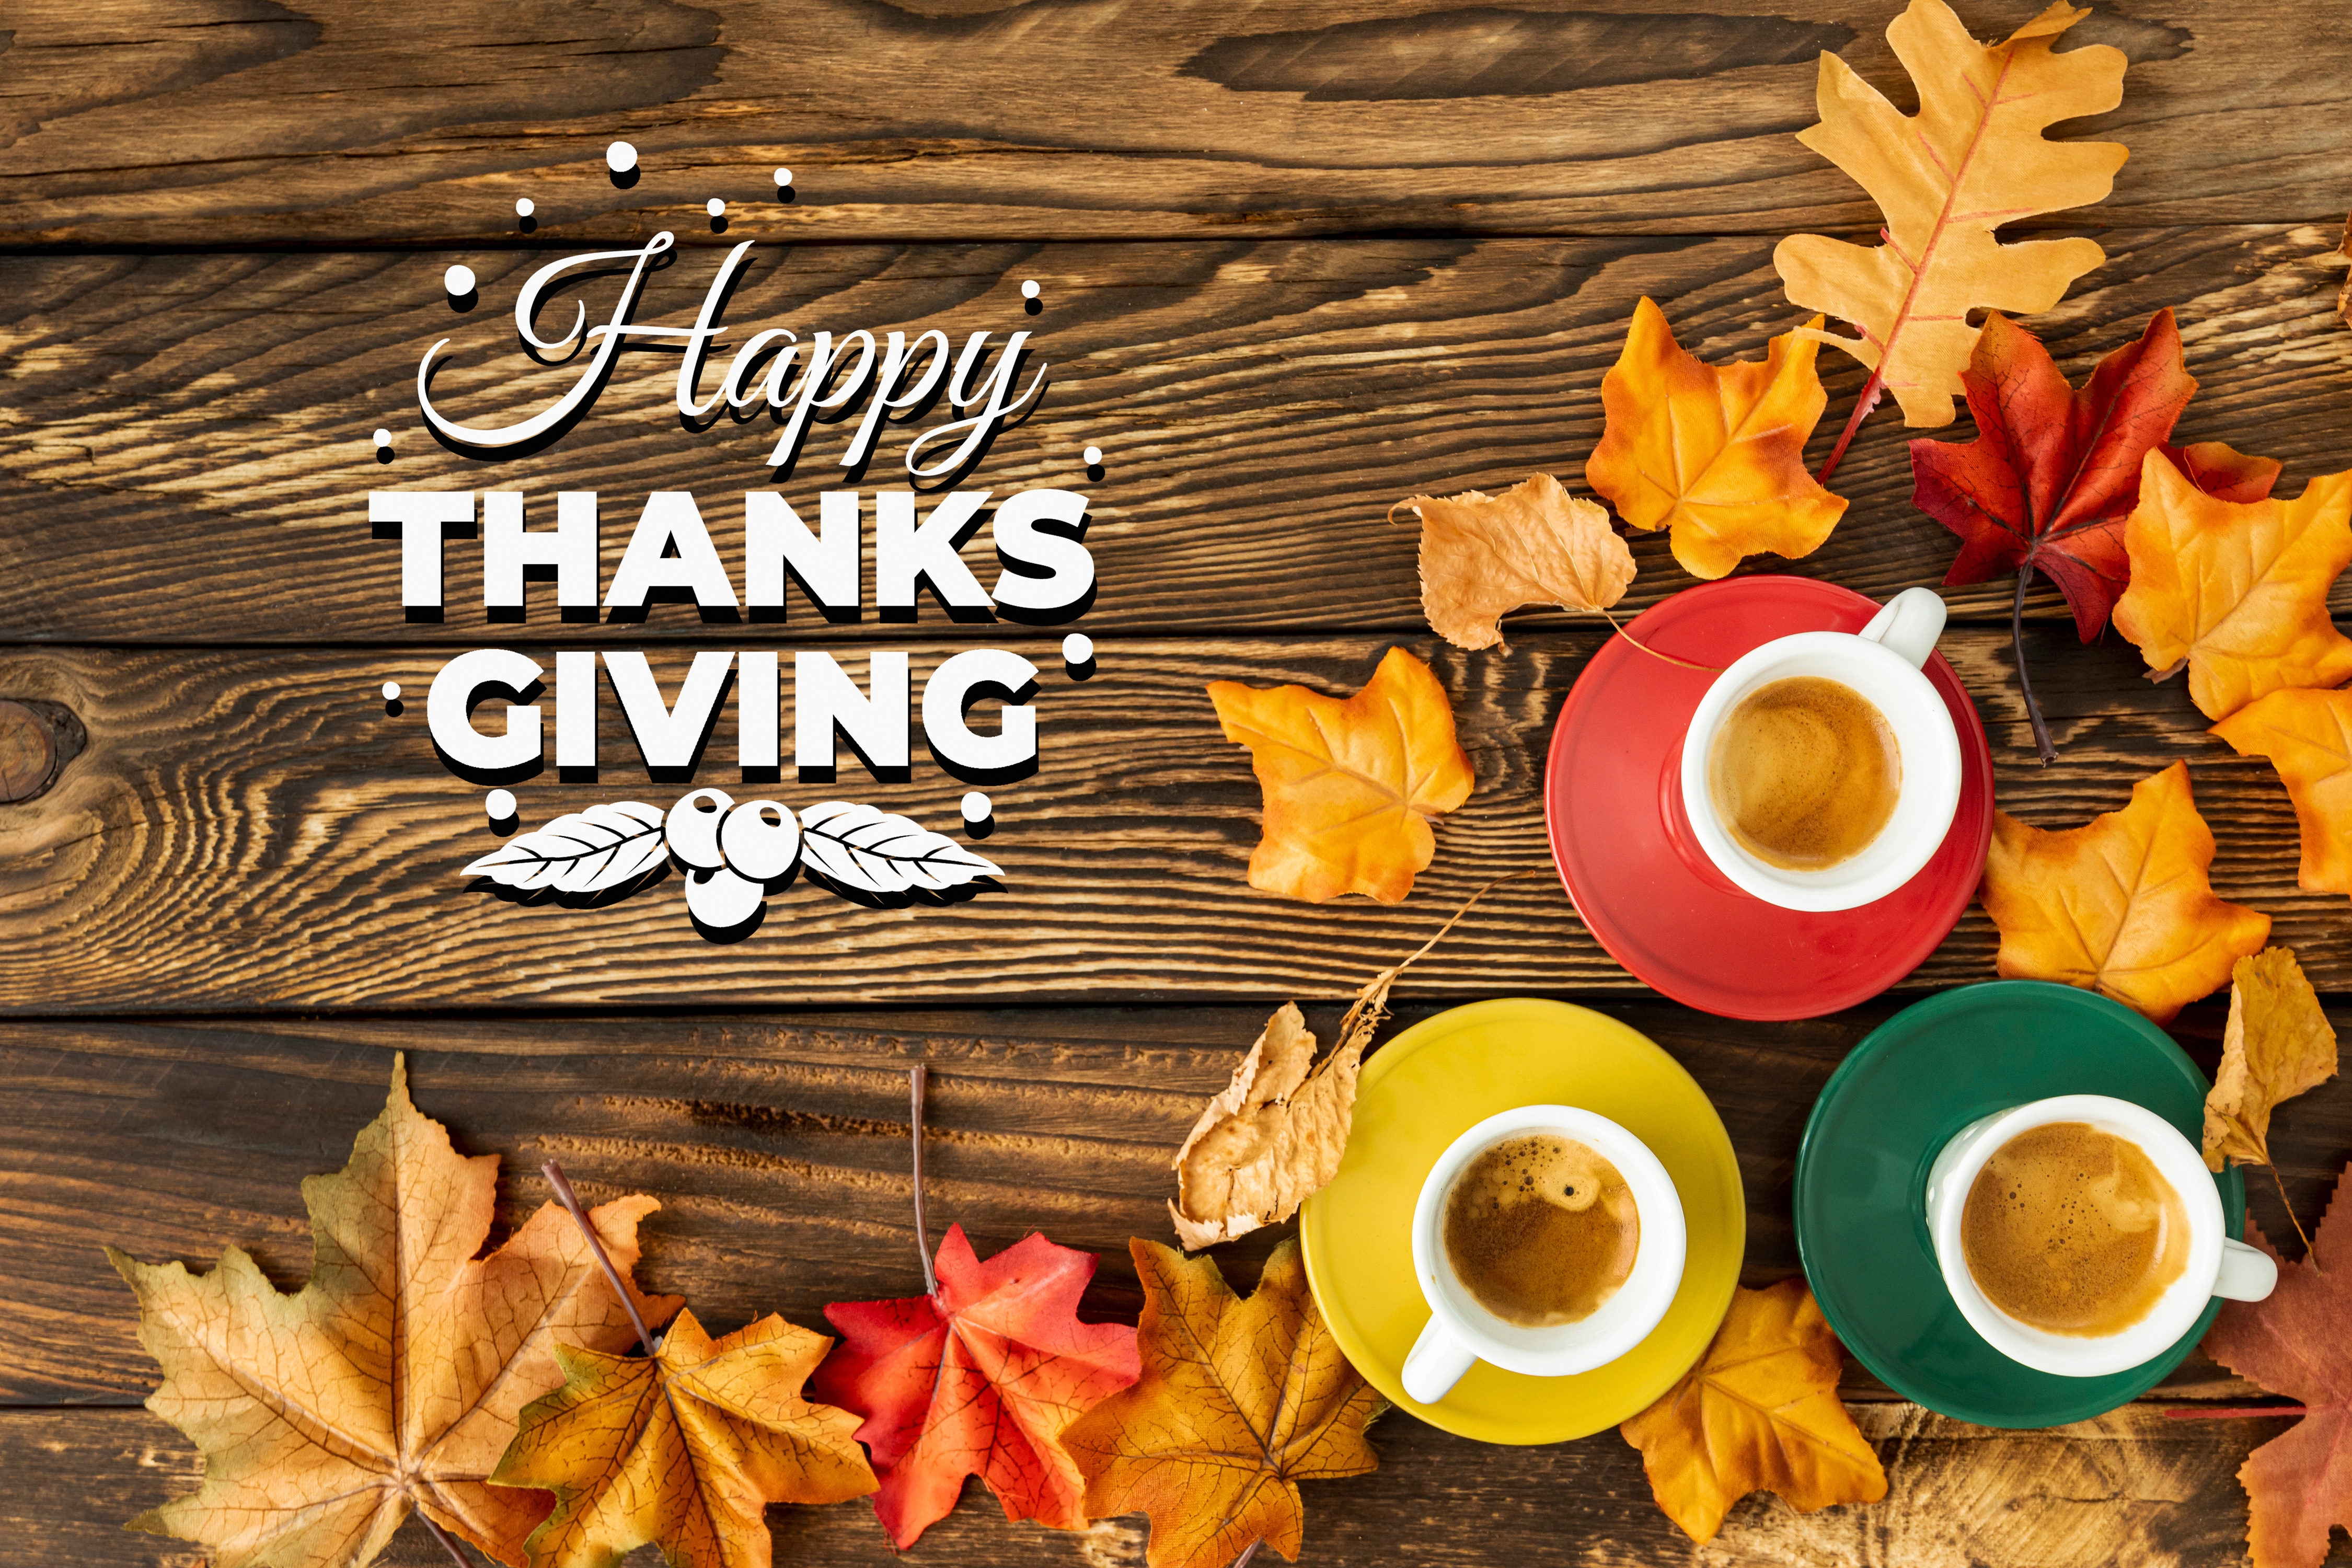 HD wallpaper, Happy Thanksgiving, Wooden Background, Coffee Cups, Thanksgiving Day, Wooden Floor, Autumn Leaves